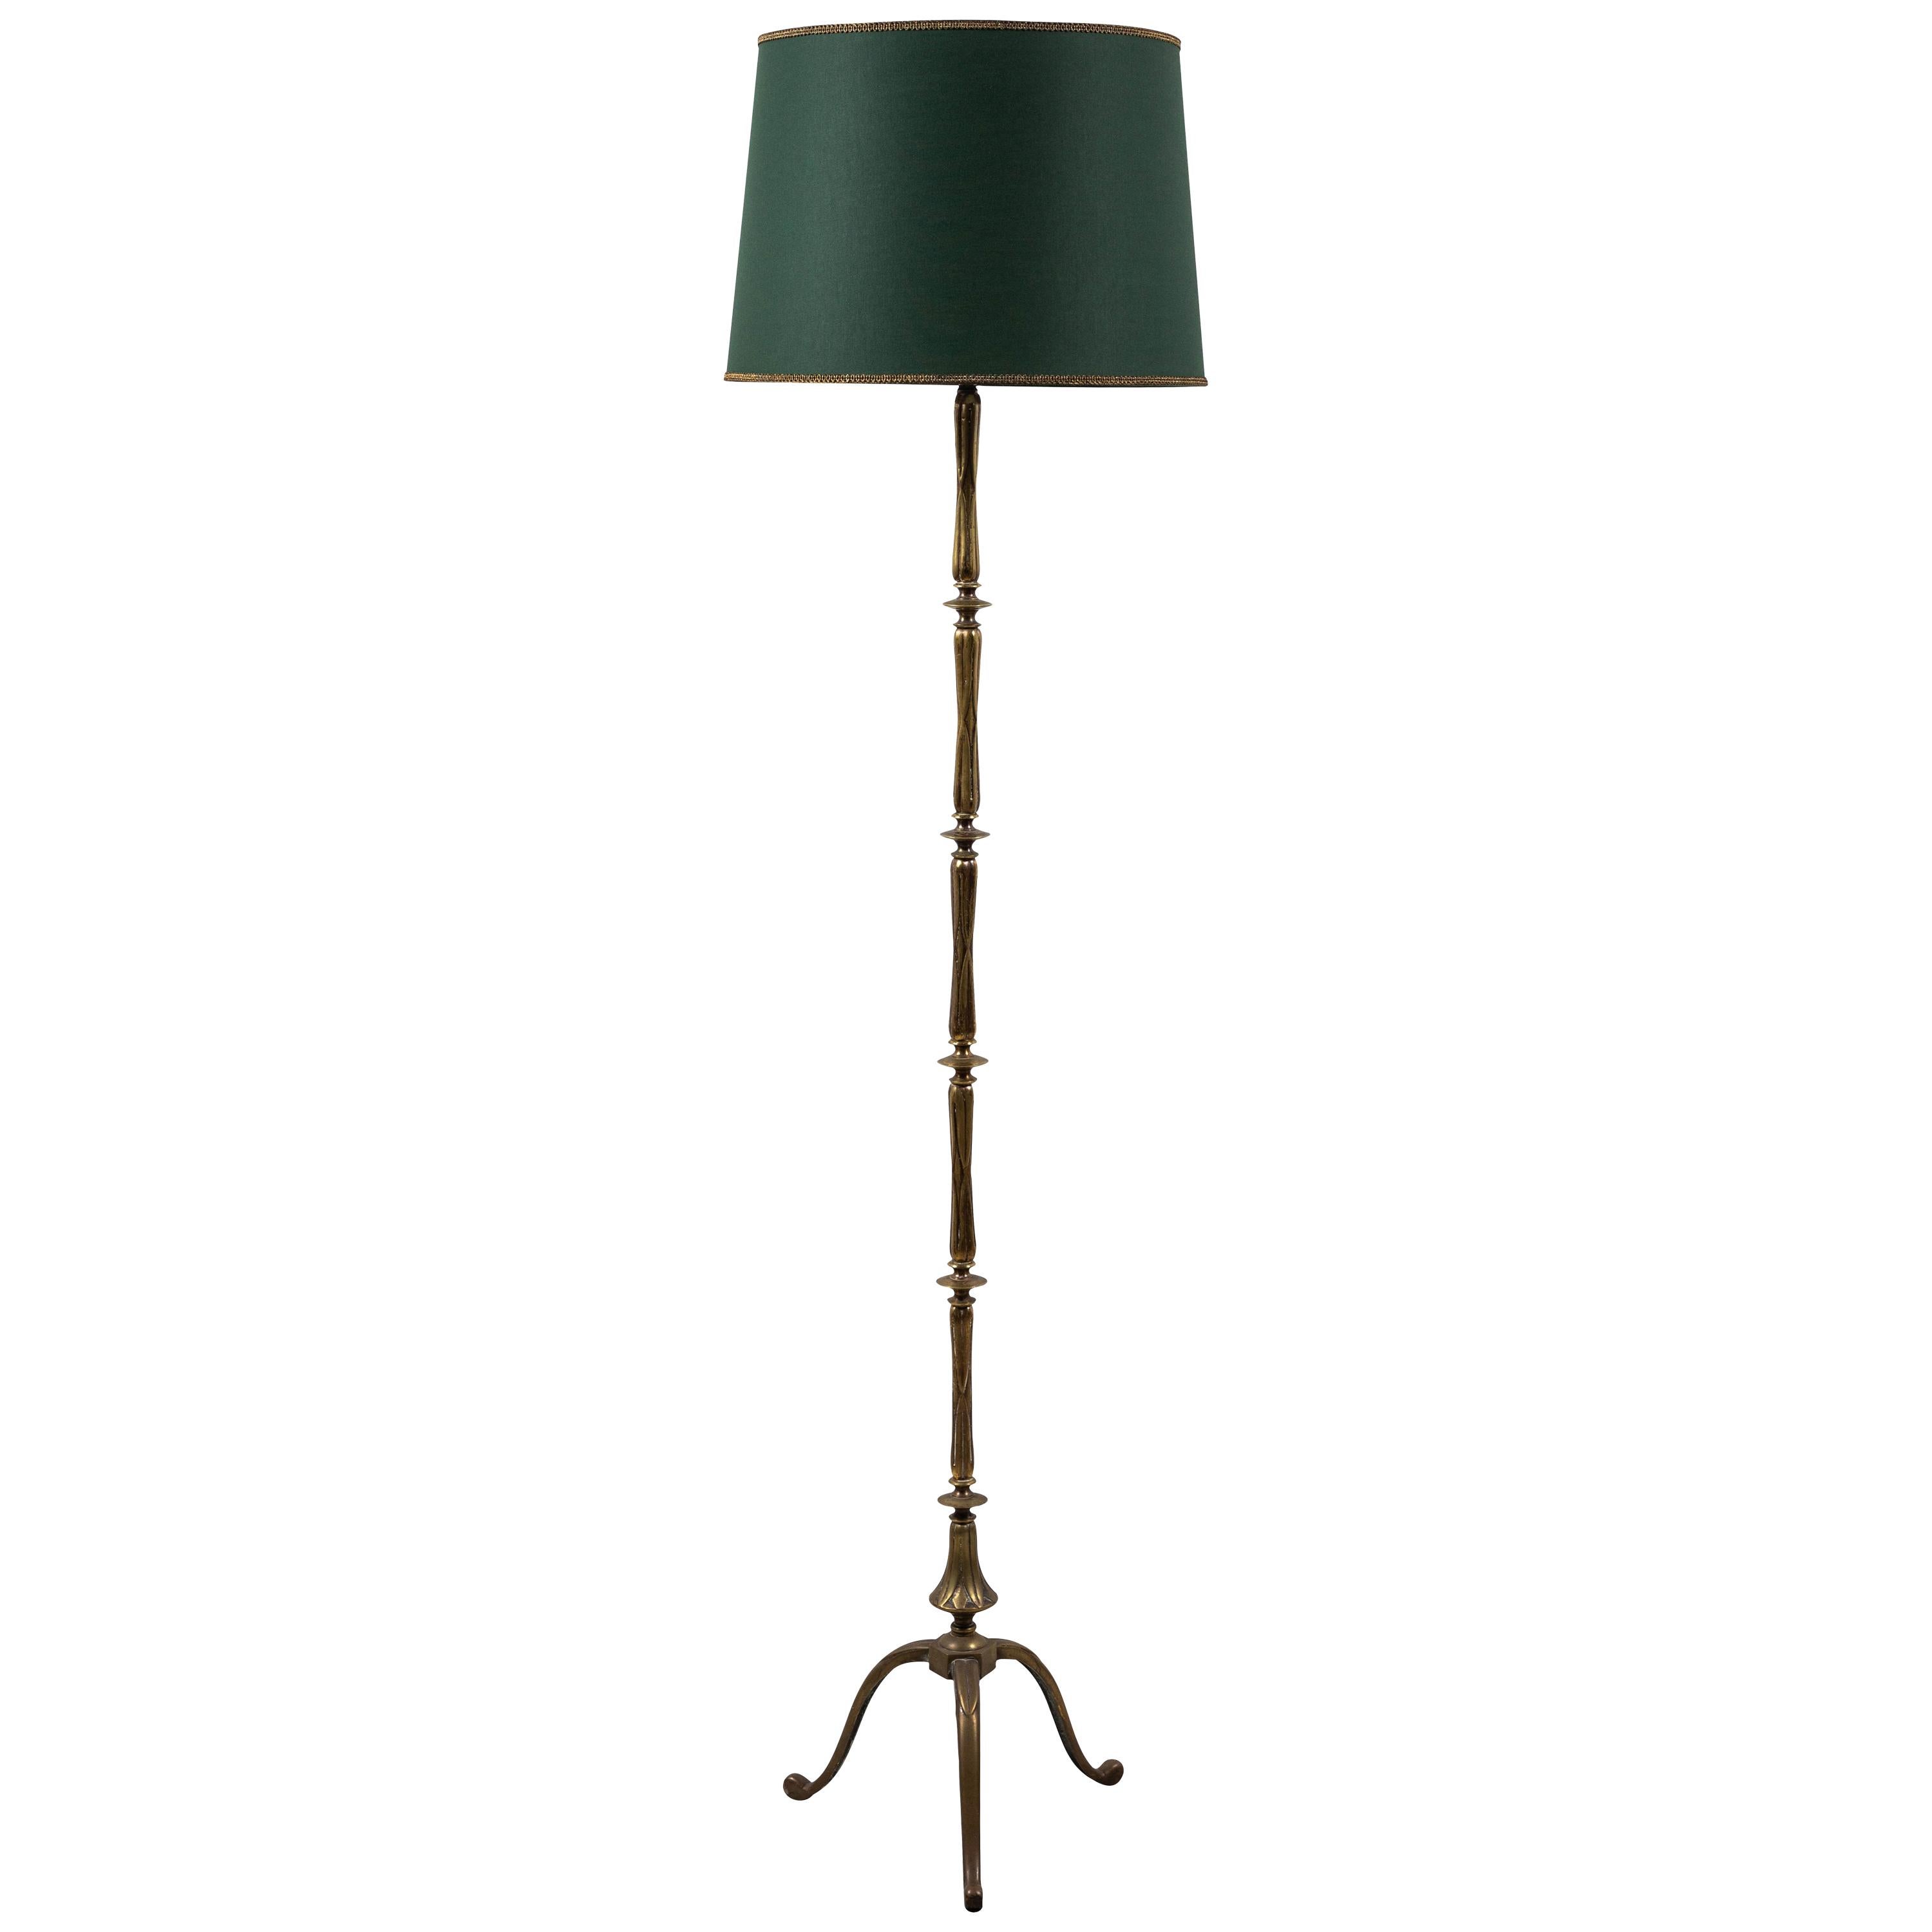 French Turned Brass Floor Lamp with Tripod Base and Green Book Cloth Shade